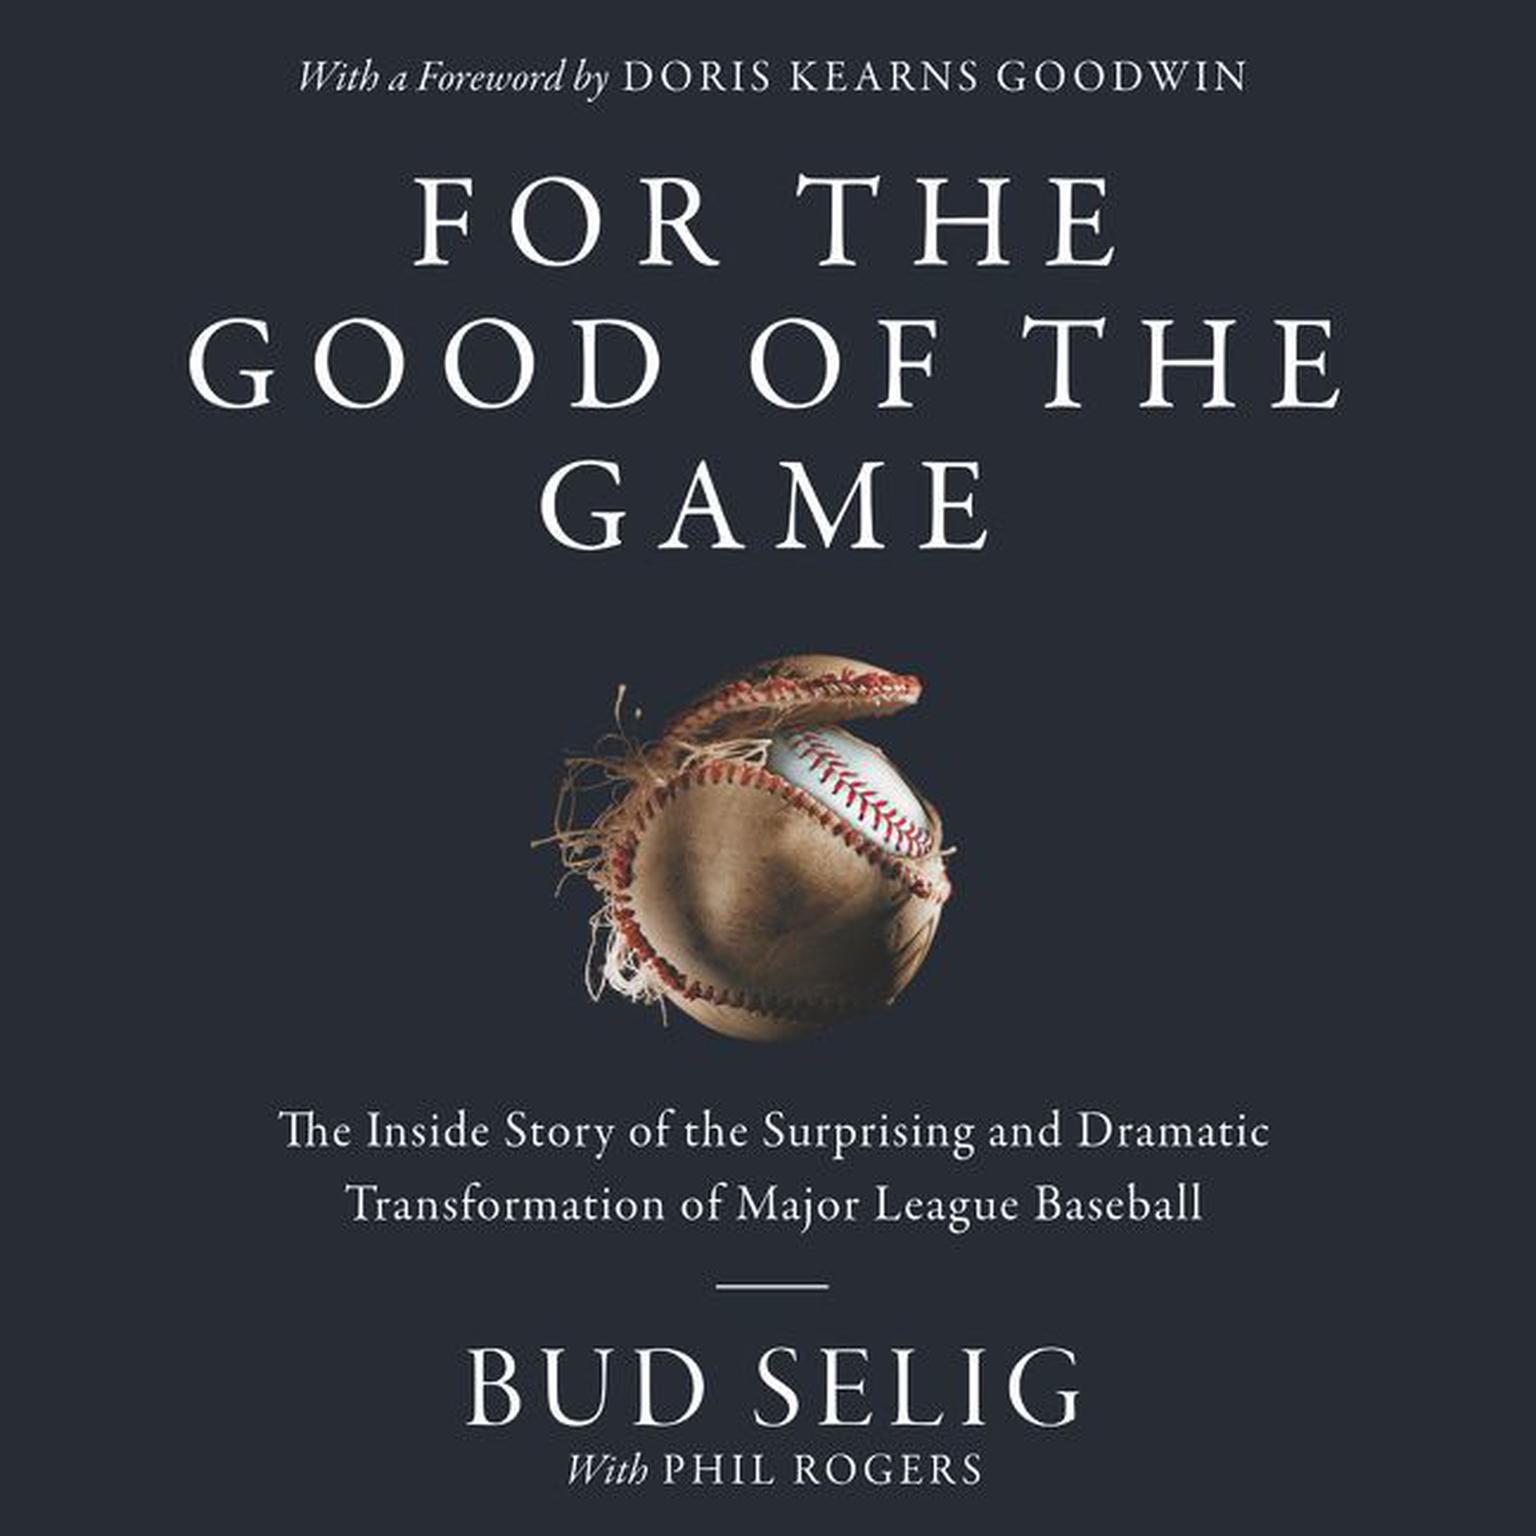 For the Good of the Game: The Inside Story of the Surprising and Dramatic Transformation of Major League Baseball Audiobook, by Bud Selig